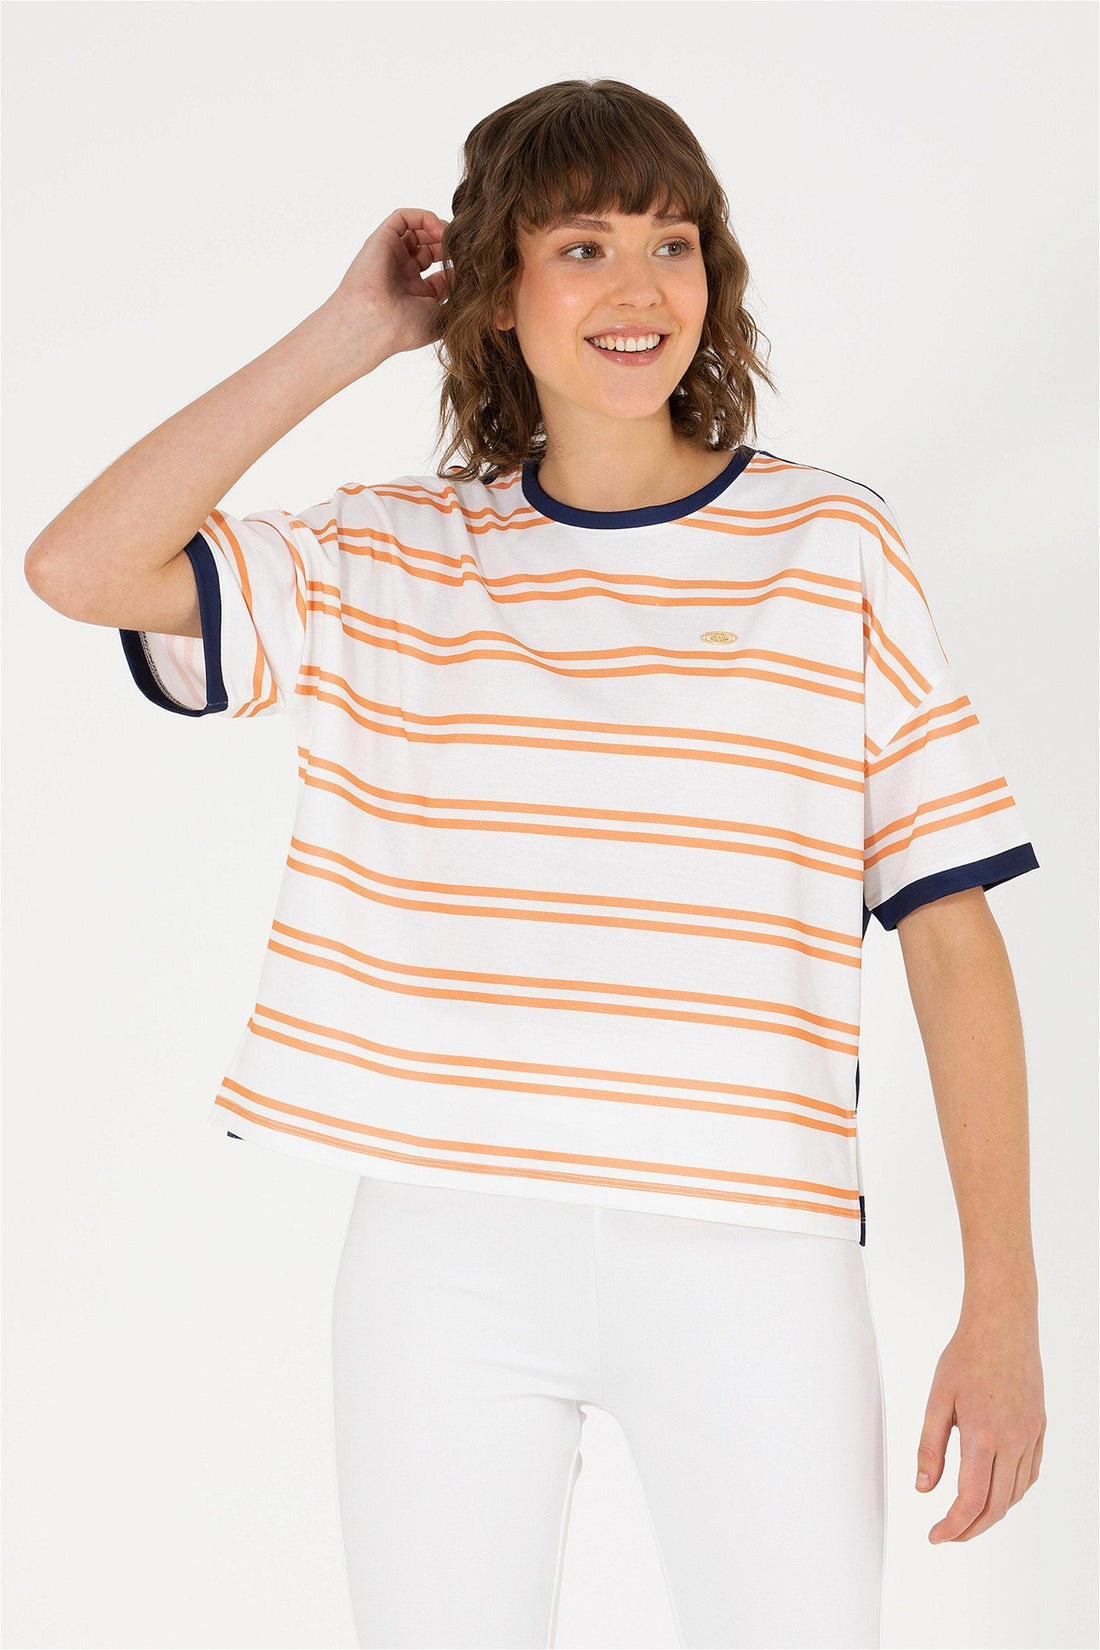 Striped Over-Sized Short Sleeve T-Shirt